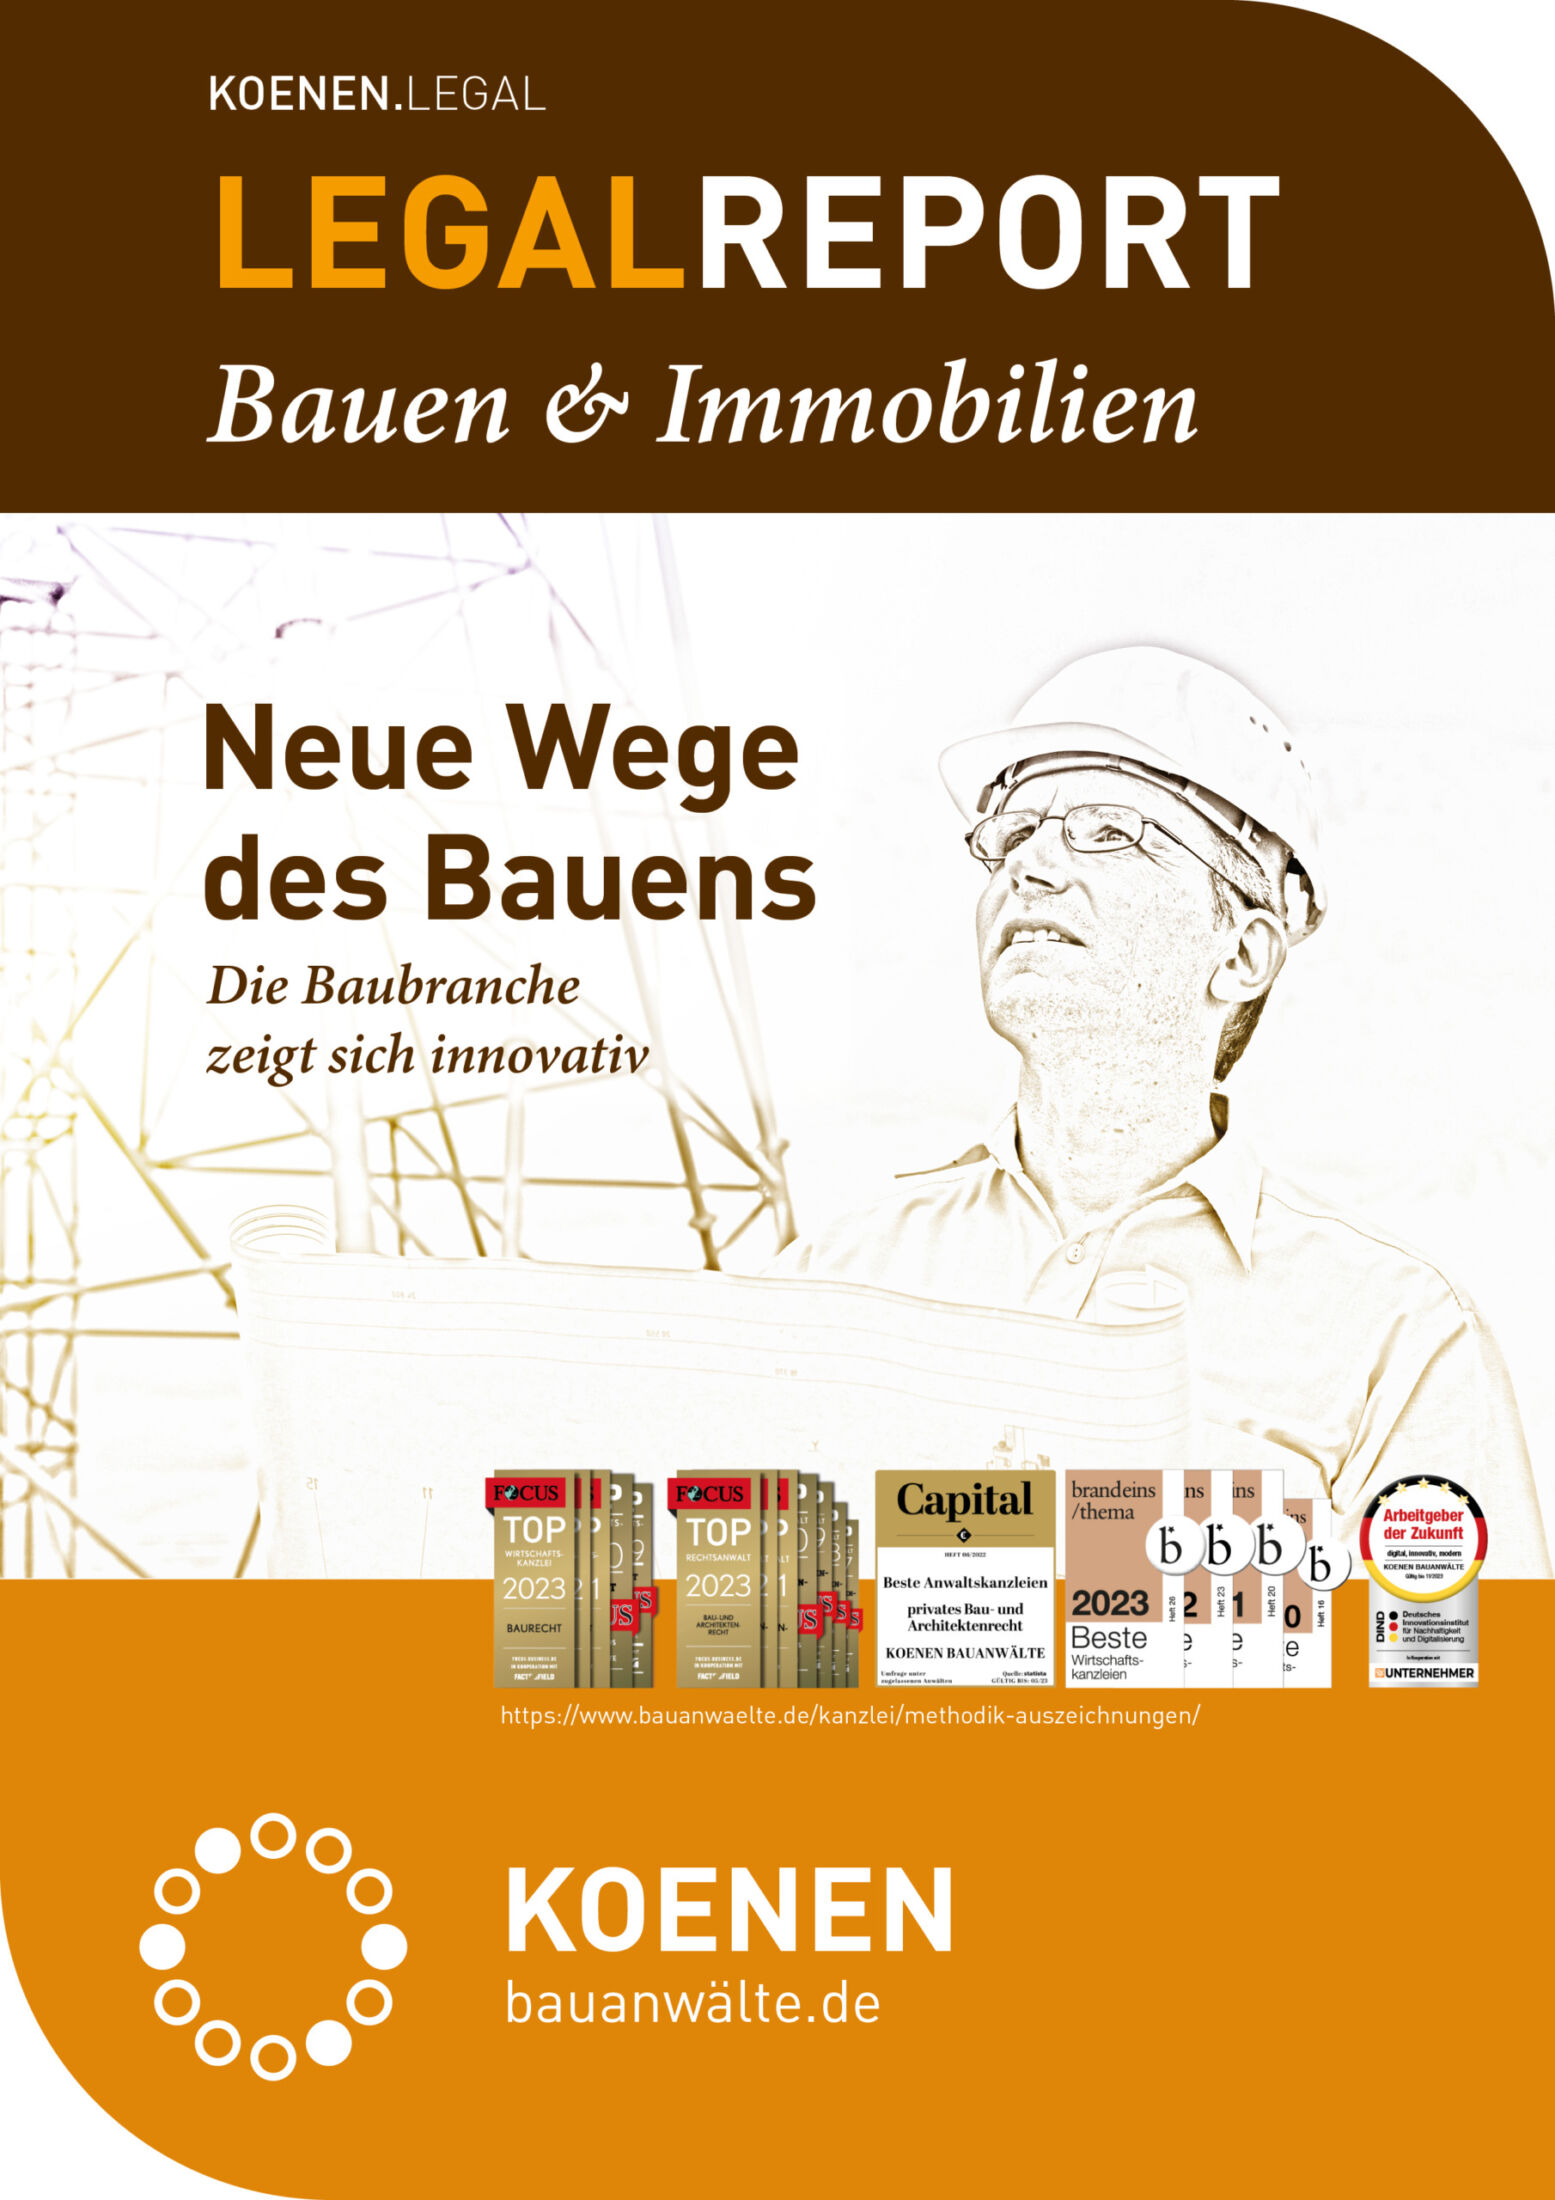 Legal Report Bauen Immobilien scaled